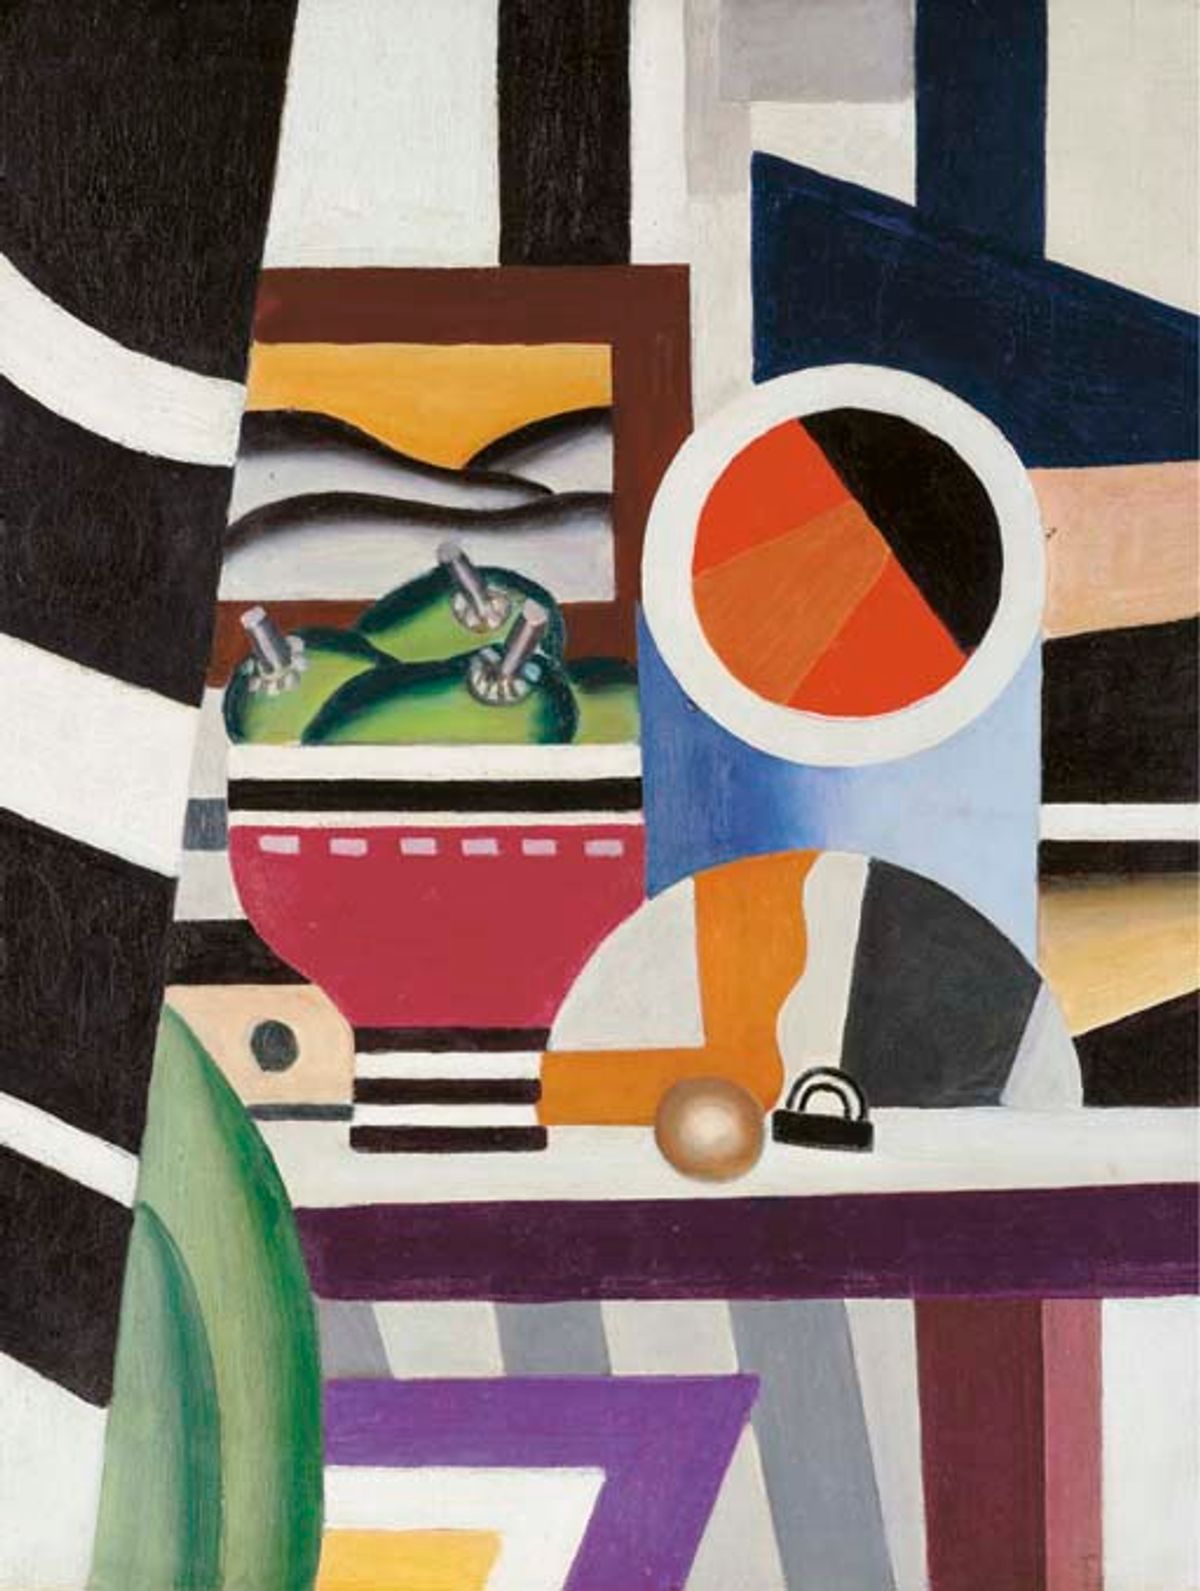 MoMA is selling Fernand Leger's  Nature morte (1923) at Christie's on 4 May 2004 